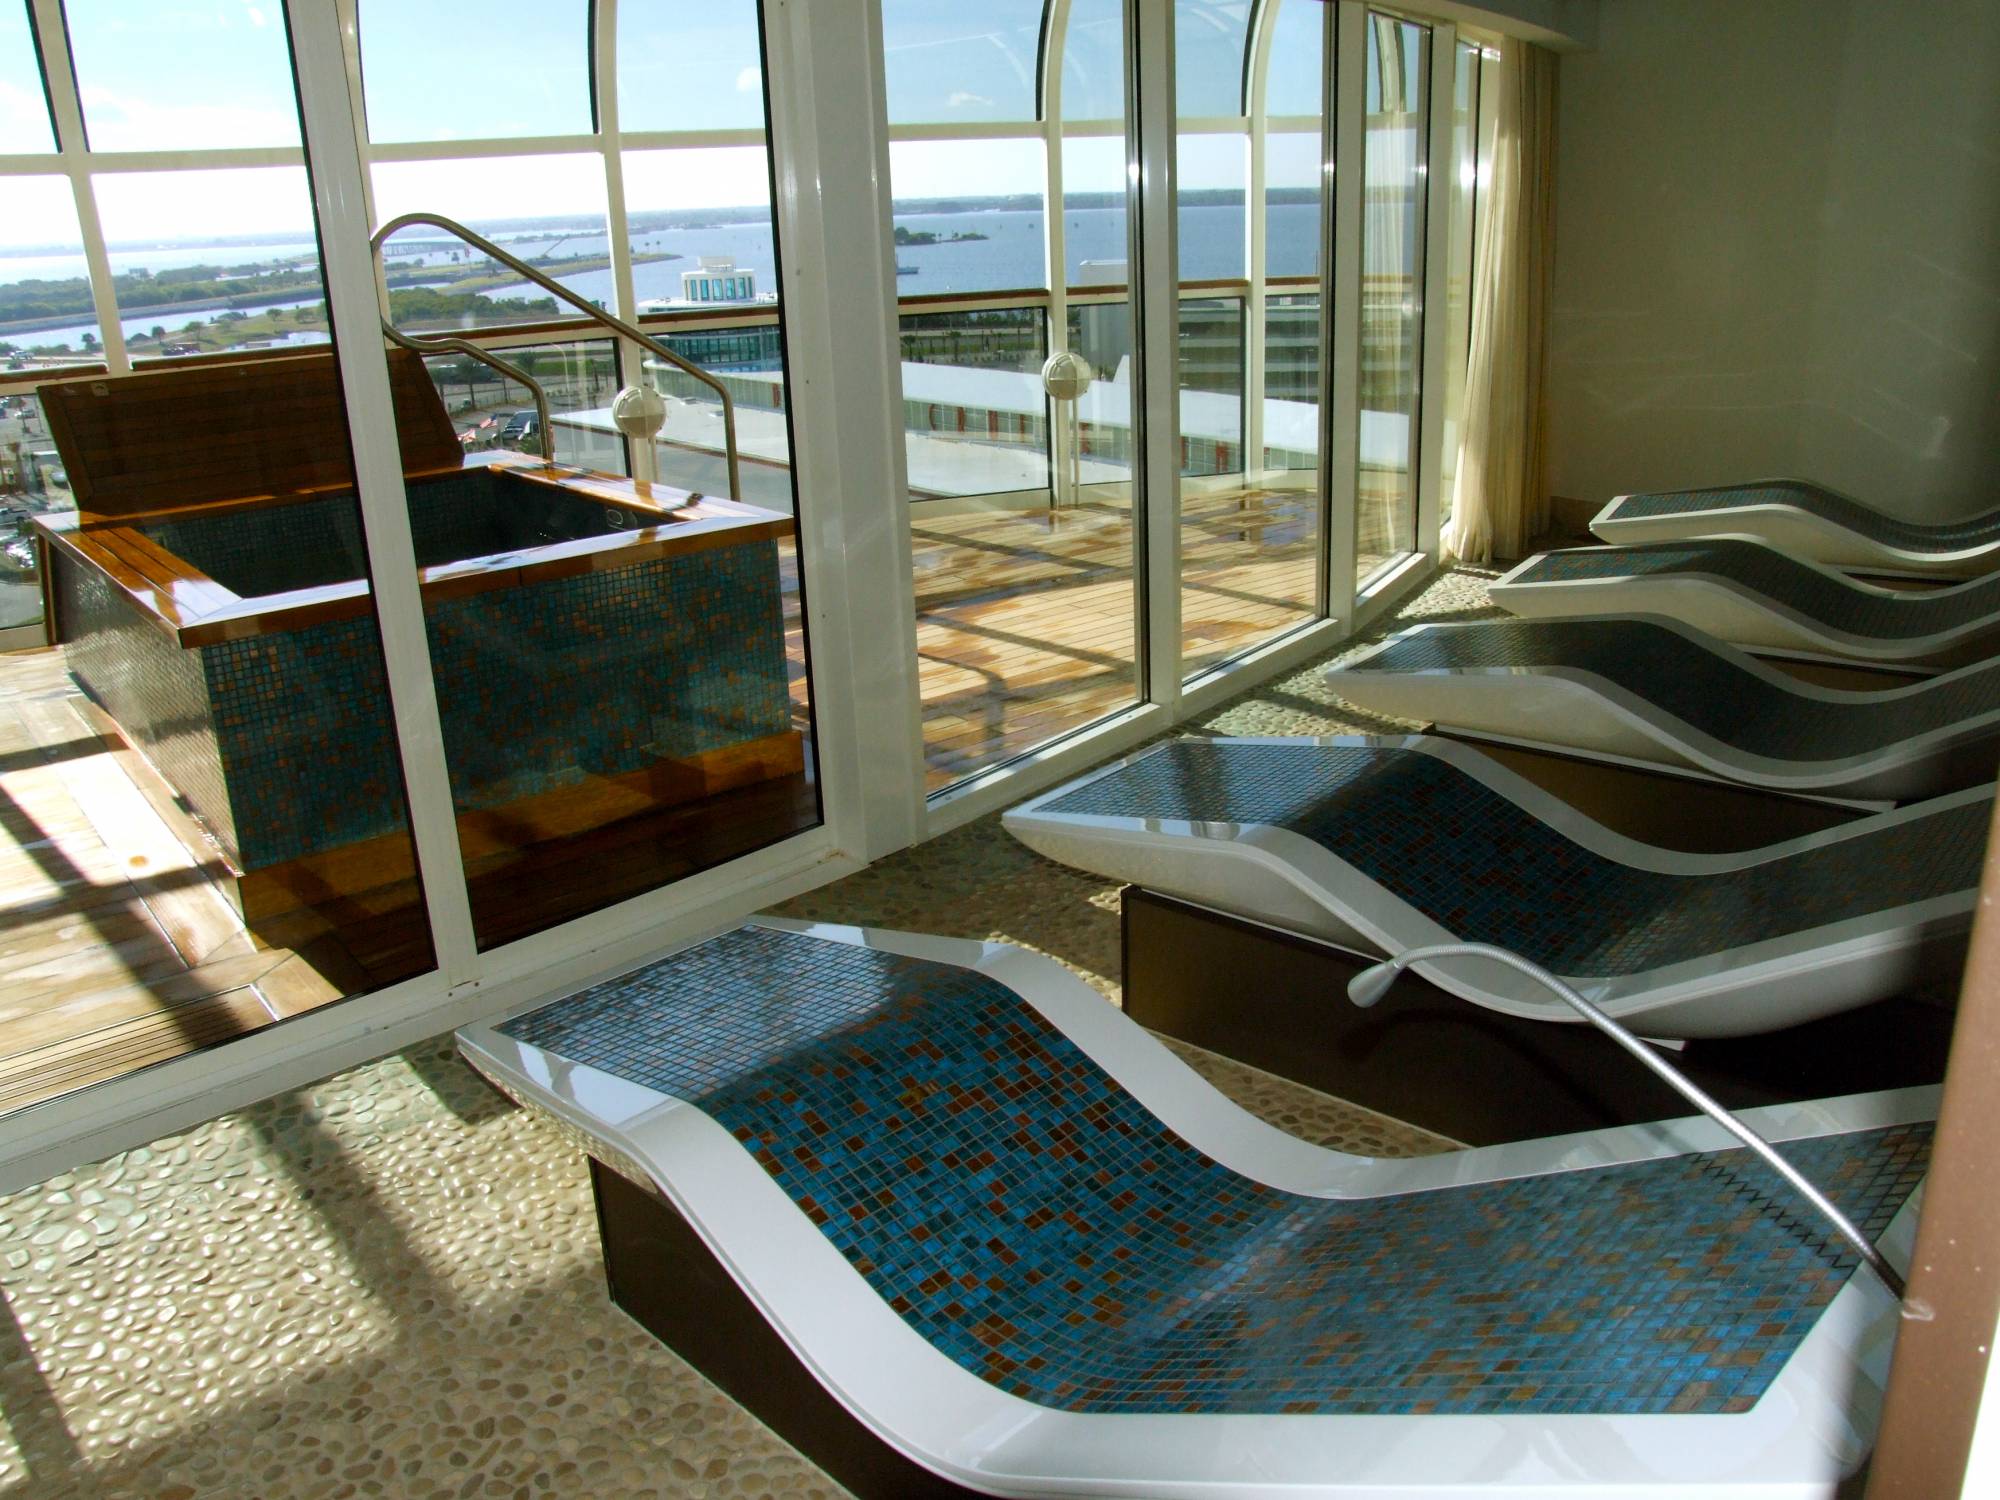 Relax and enjoy at the Spas onboard the Disney Cruise Line |PassPorter.com